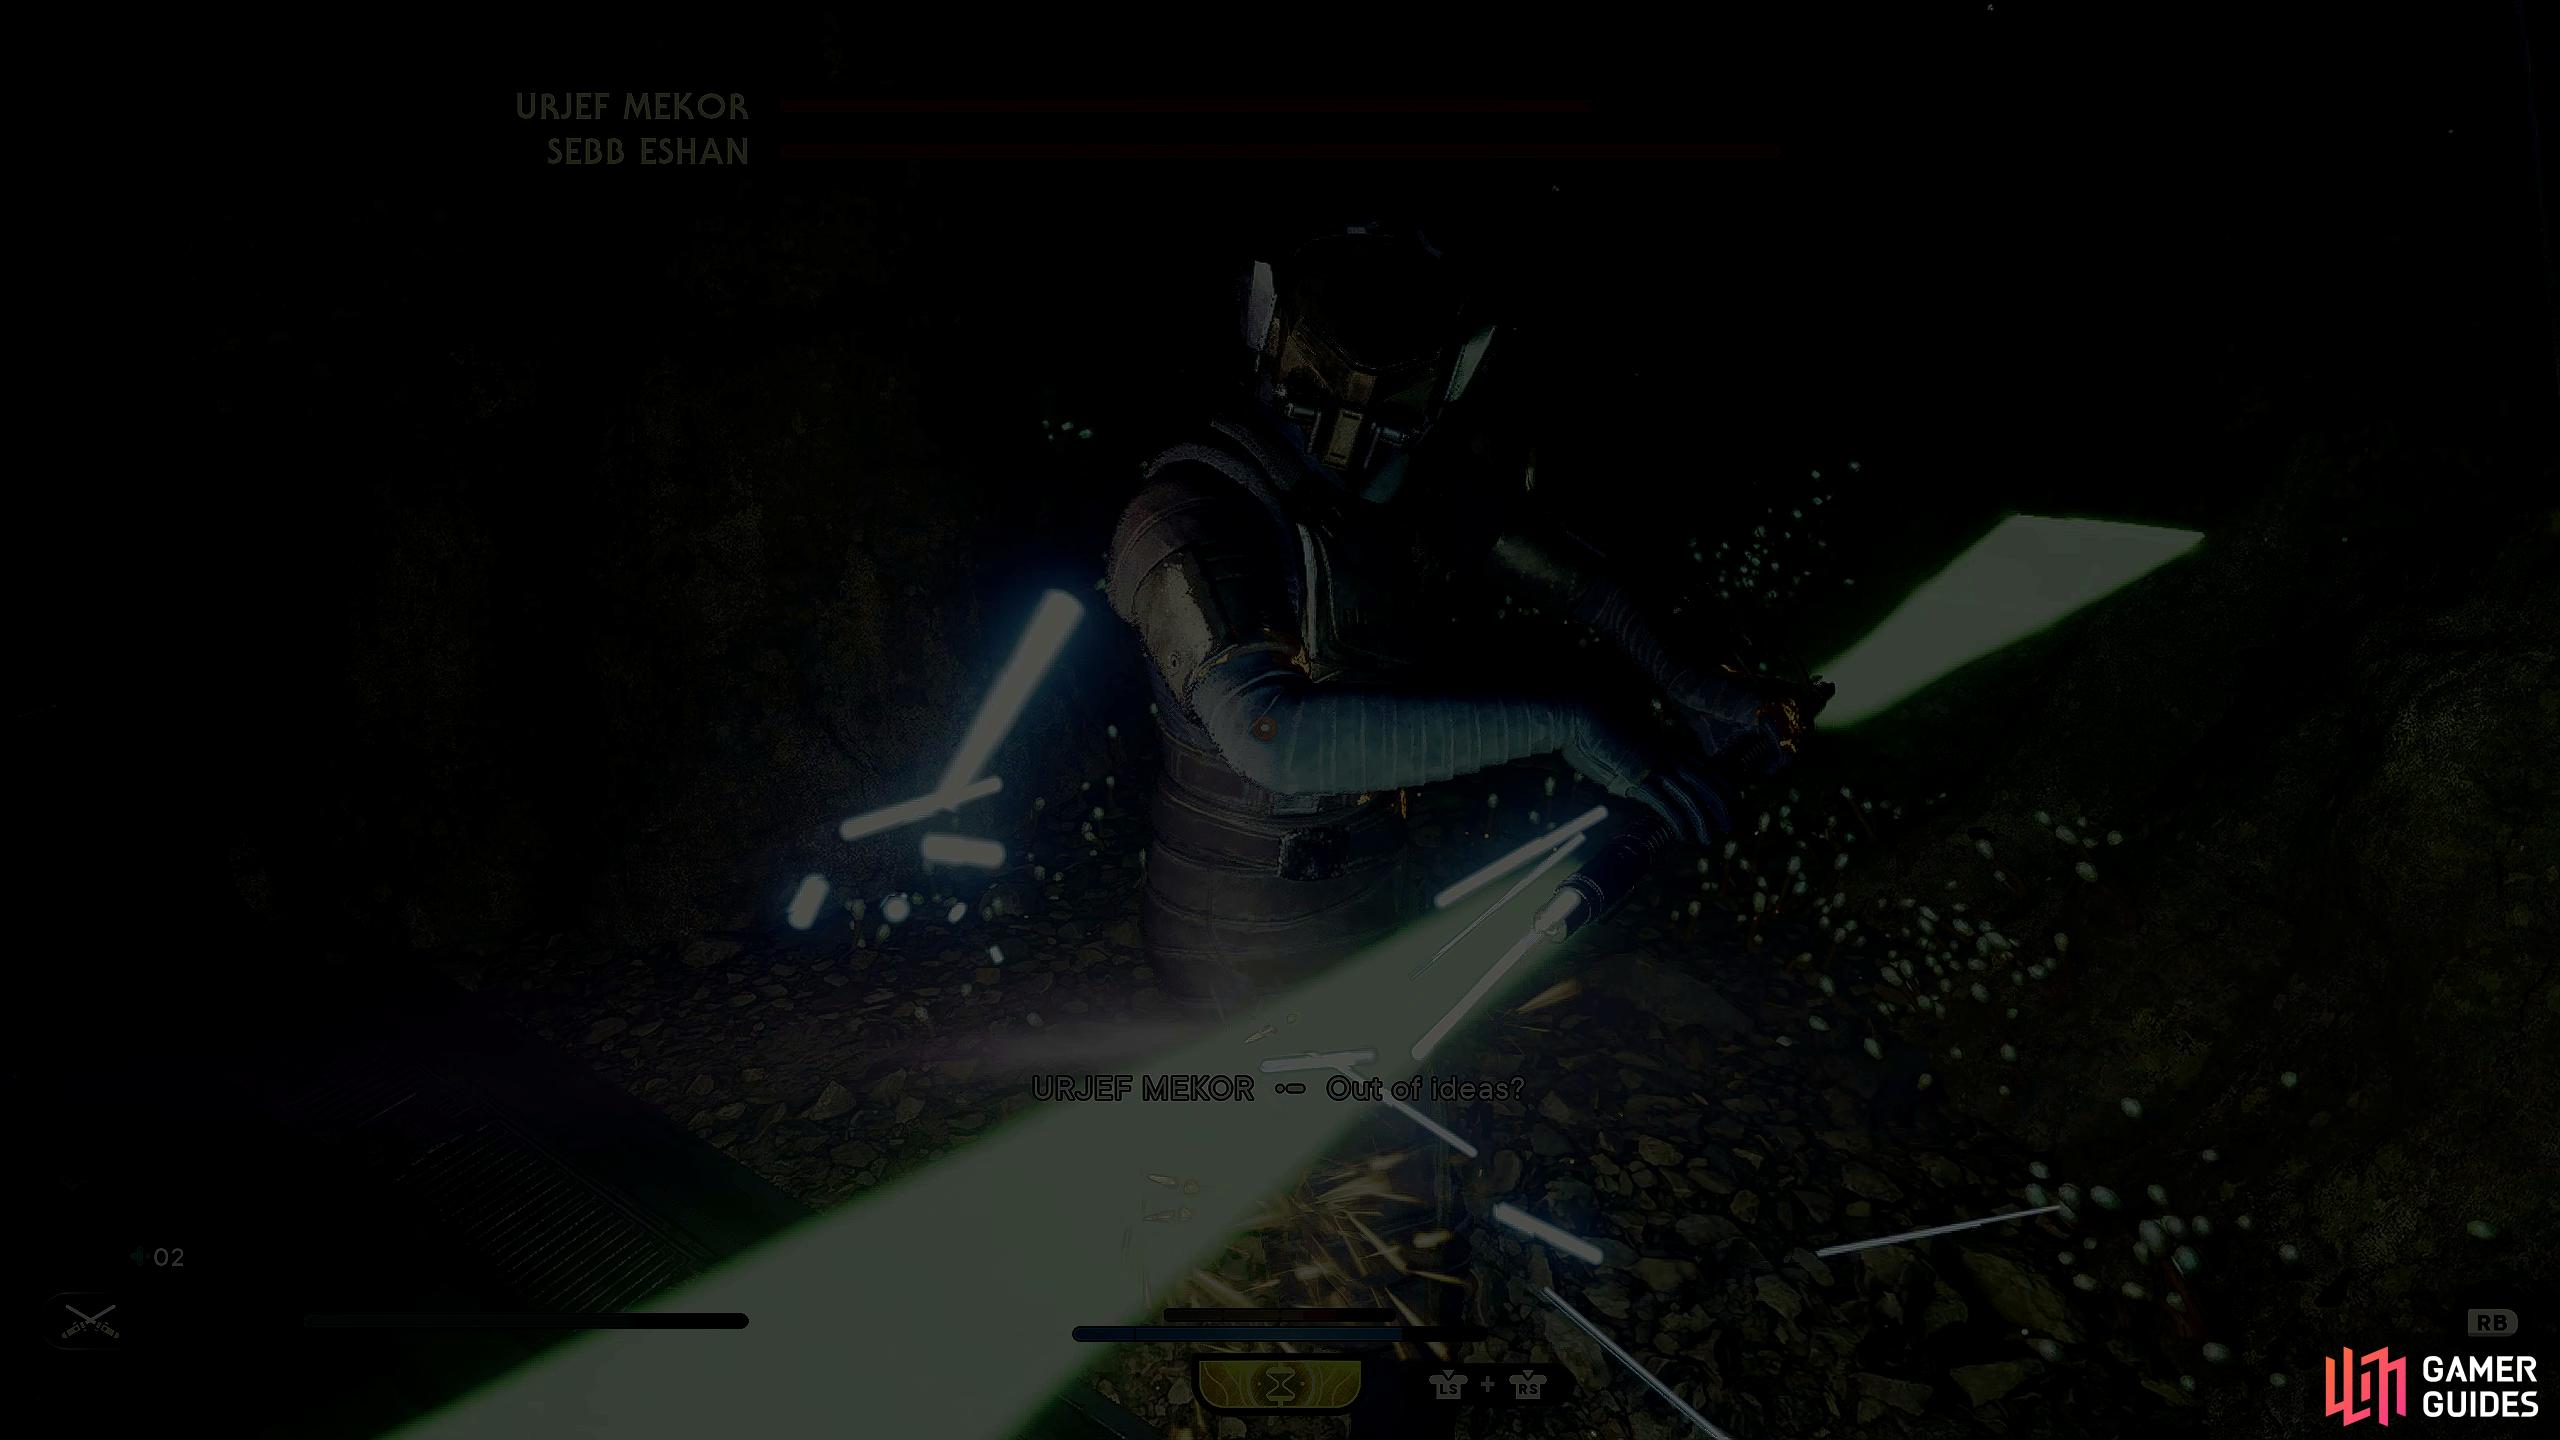 The final challenge before getting the Star Wars Jedi Survivor Chest Map Upgrade is to beat three jedi tryhards. 